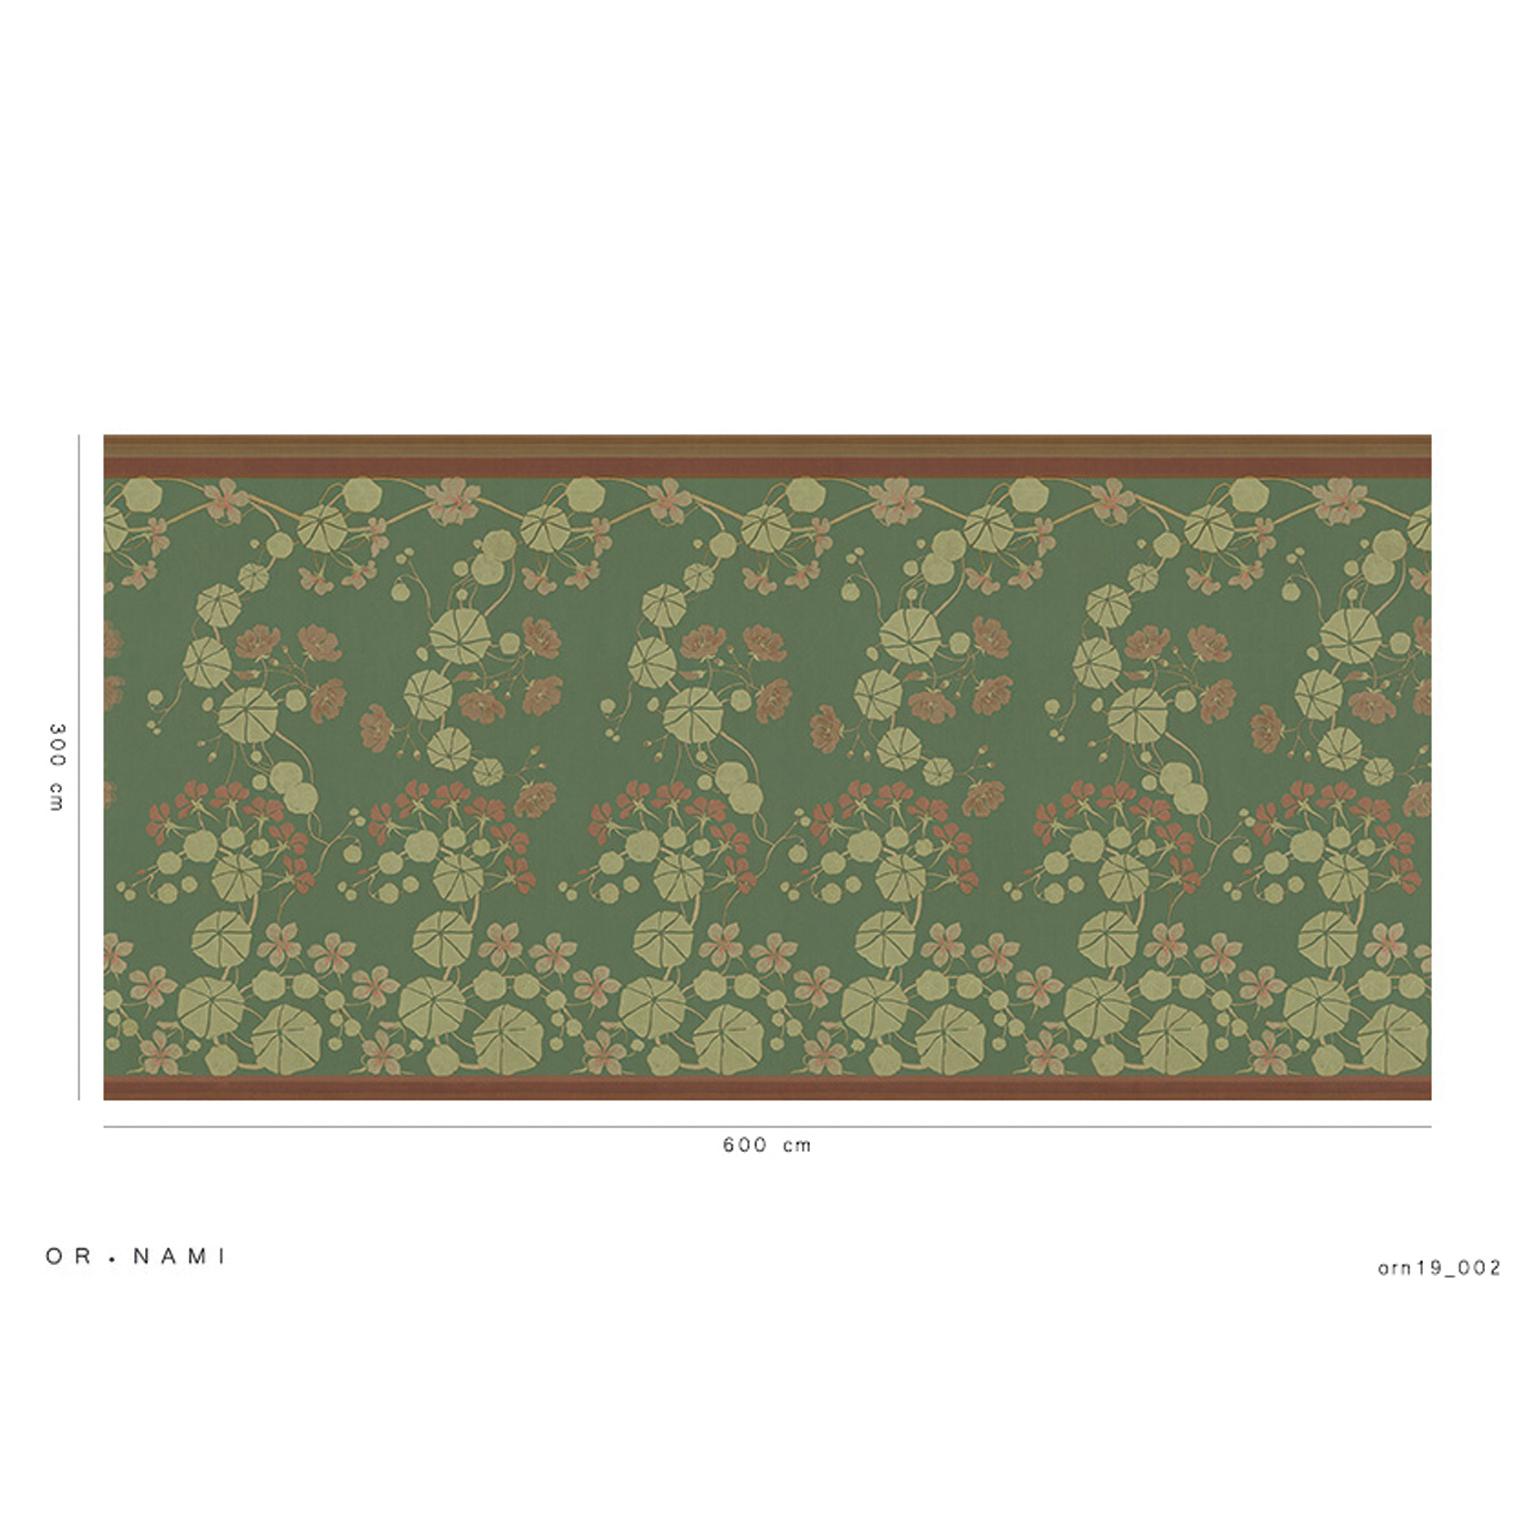 Contemporary Ornami Art Nouveau Green Vinyl Wallpaper Made in Italy Digital Printing For Sale